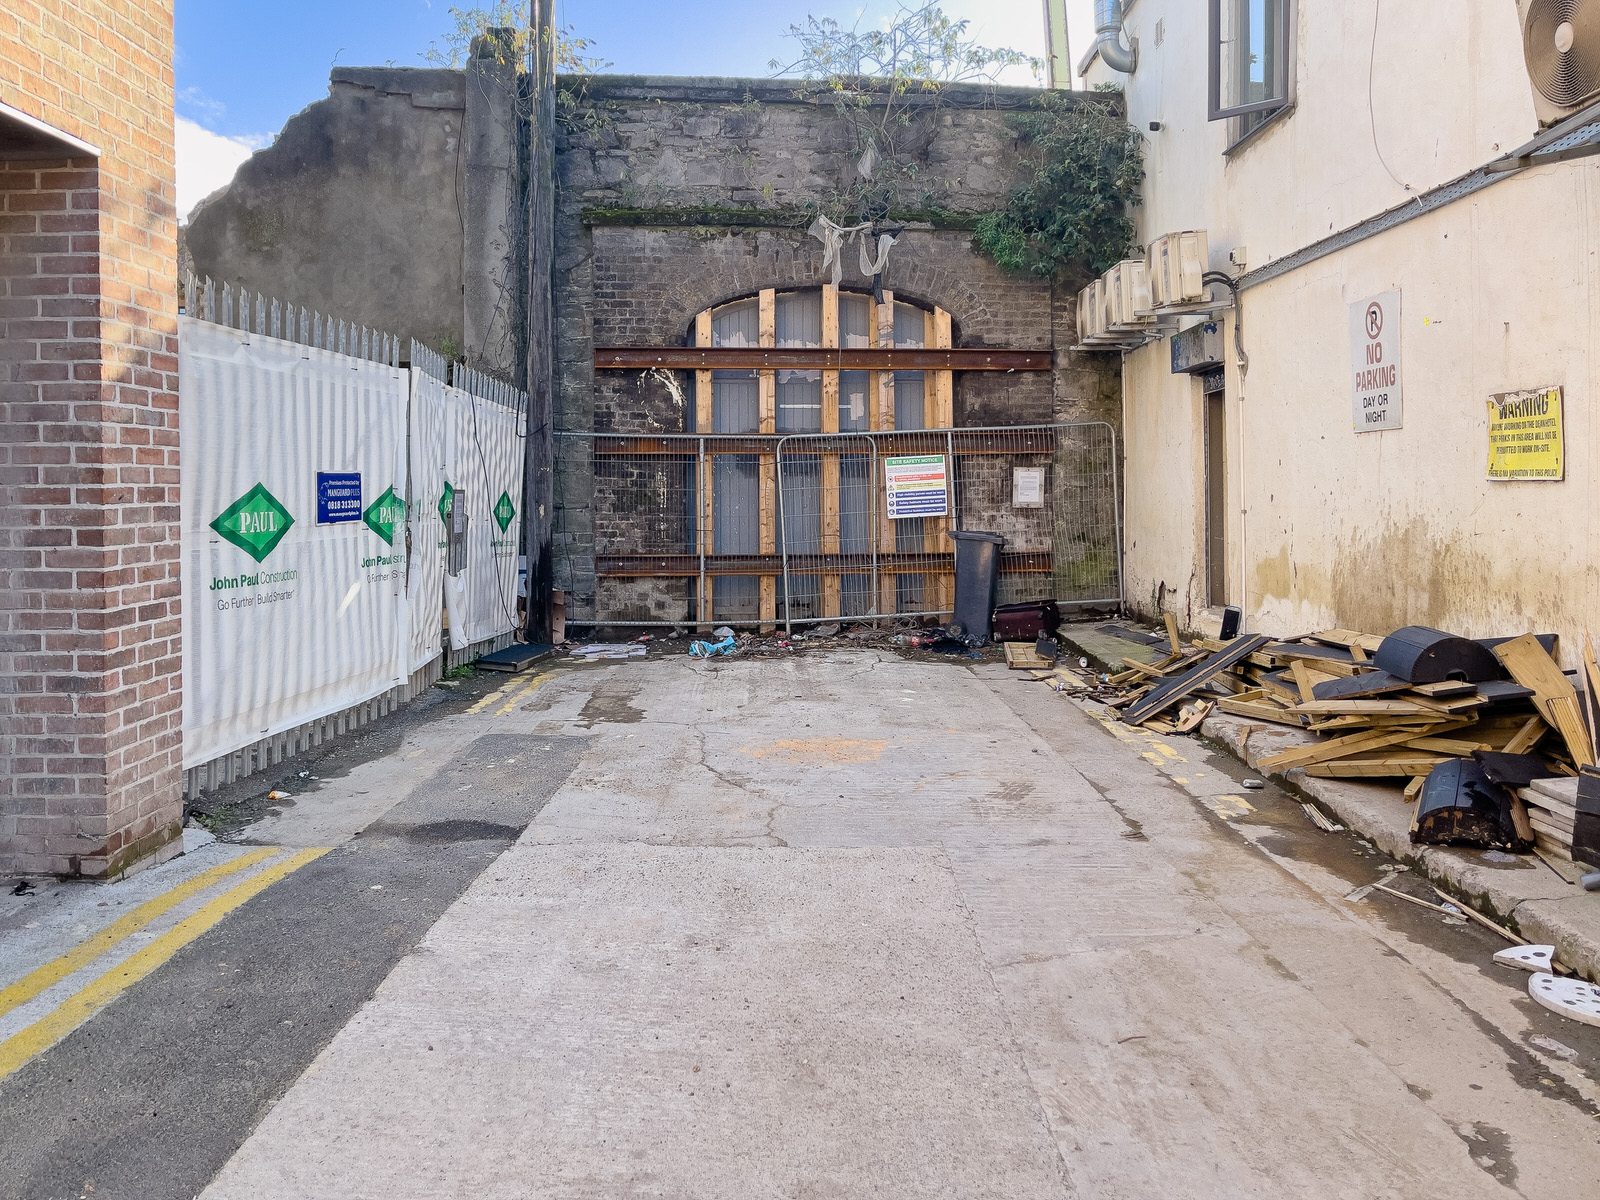 CAMDEN PLACE [COMPLEX OF LANES BETWEEN HARCOURT STREET AND WEXFORD STREET]-225037-1